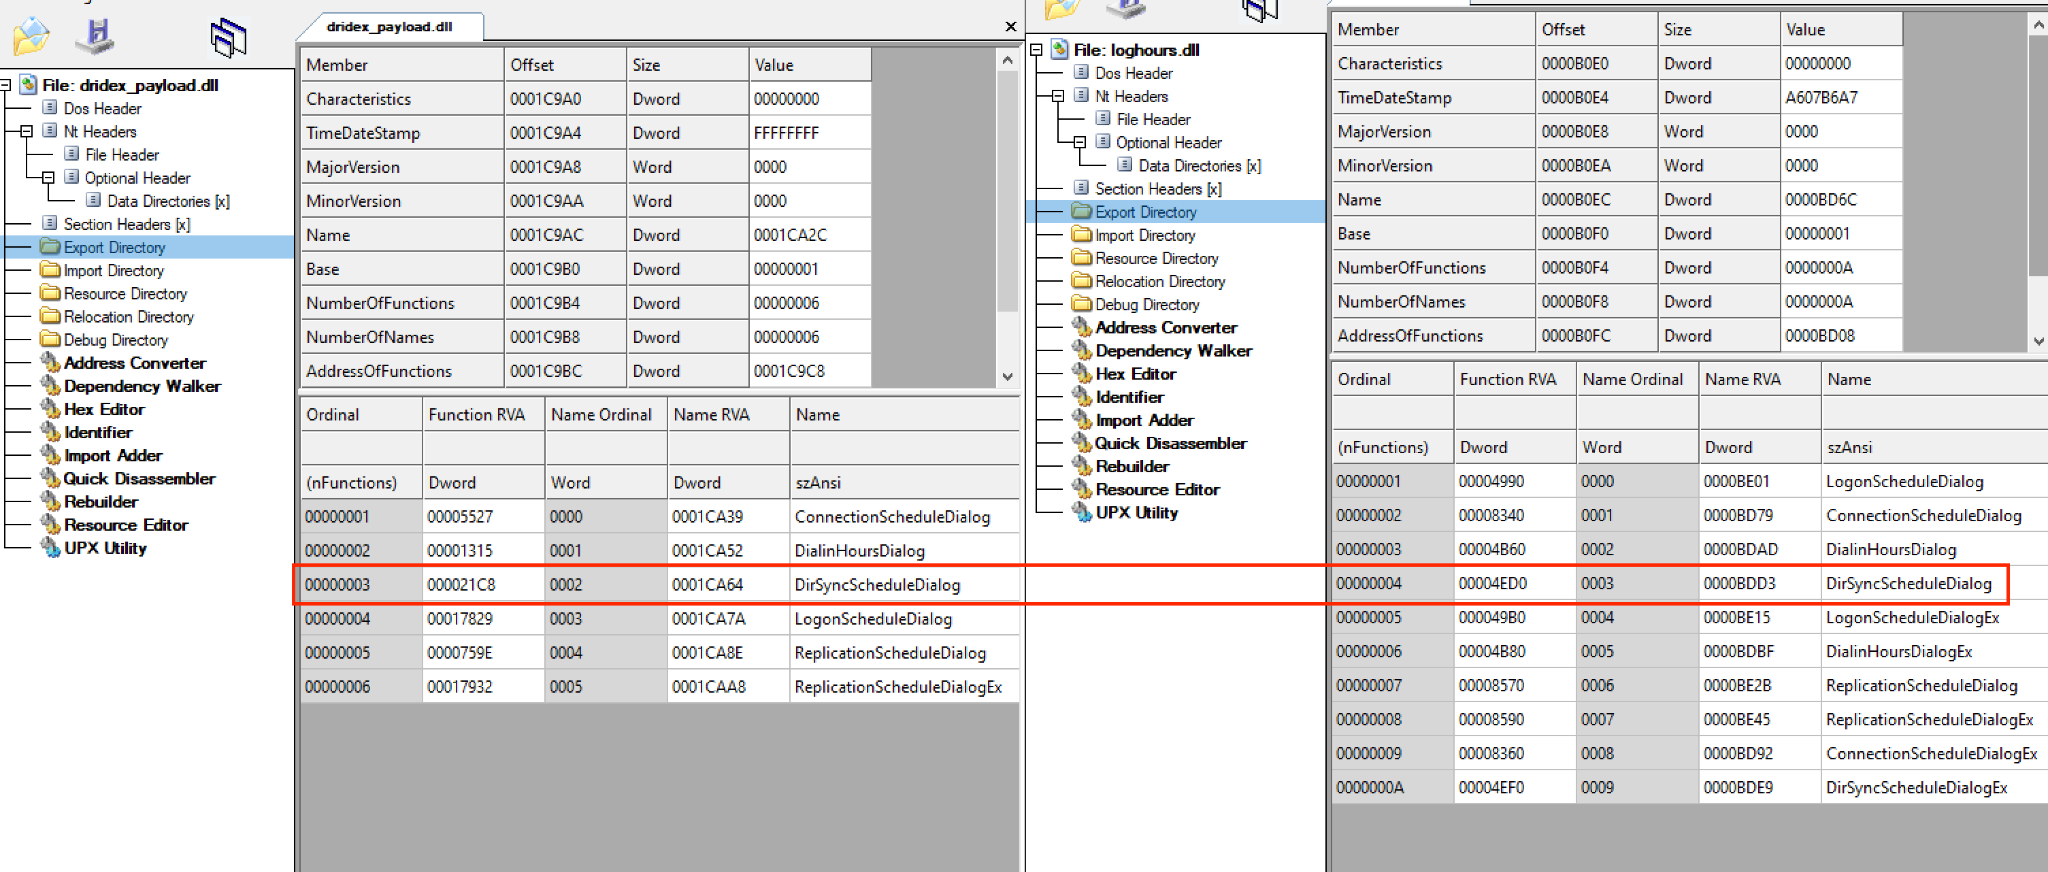 The export table from the Dridex Loader is shown on the left, and the one from the legitimate loghours.dll is shown on the right. A red box highlights the particular line to compare side by side, showing DirSyncScheduleDialog.